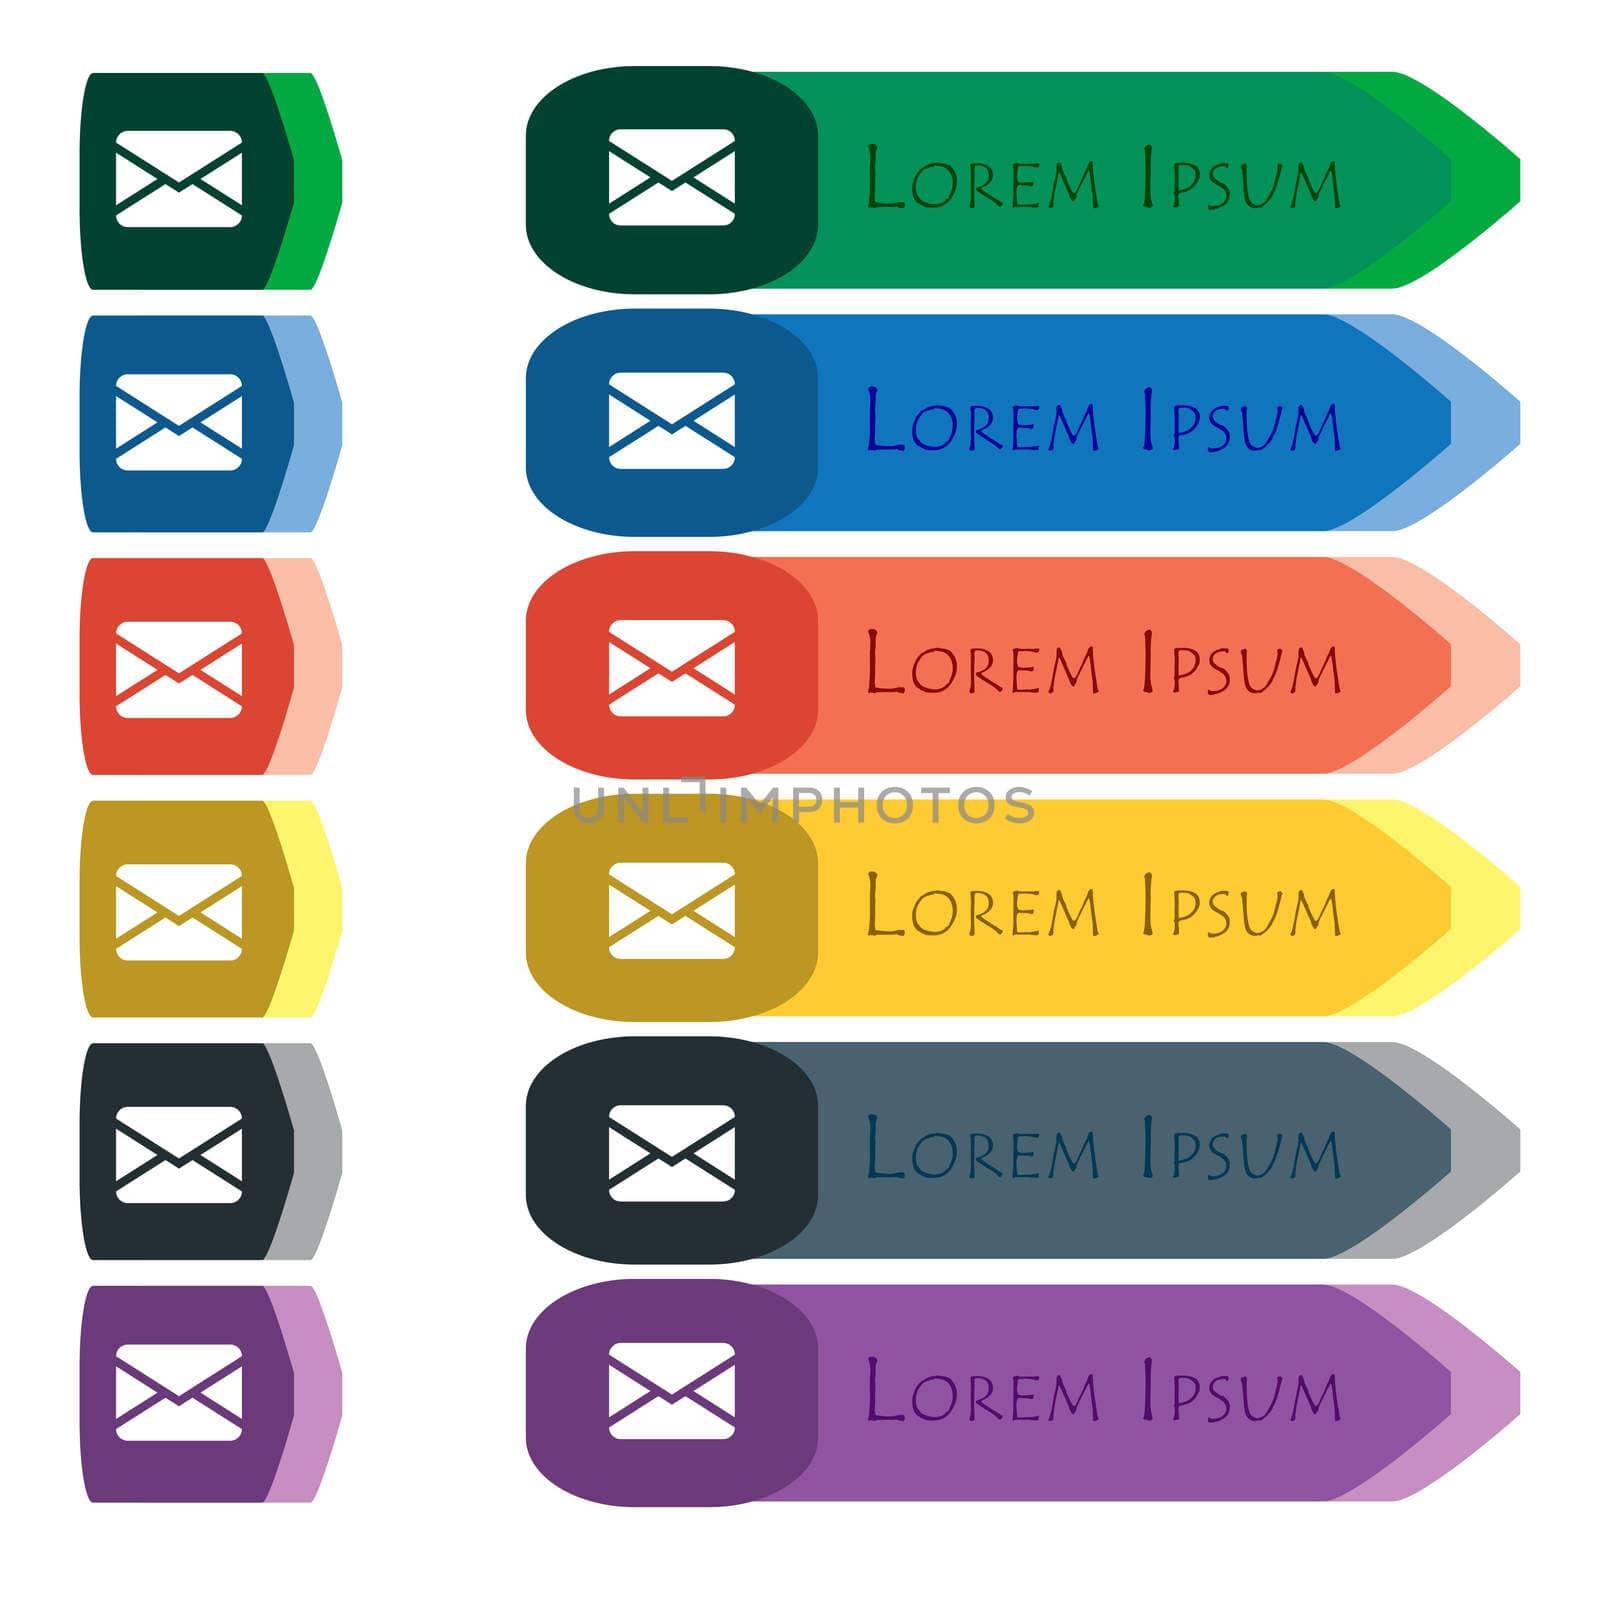 Mail, Envelope, Message icon sign. Set of colorful, bright long buttons with additional small modules. Flat design. 